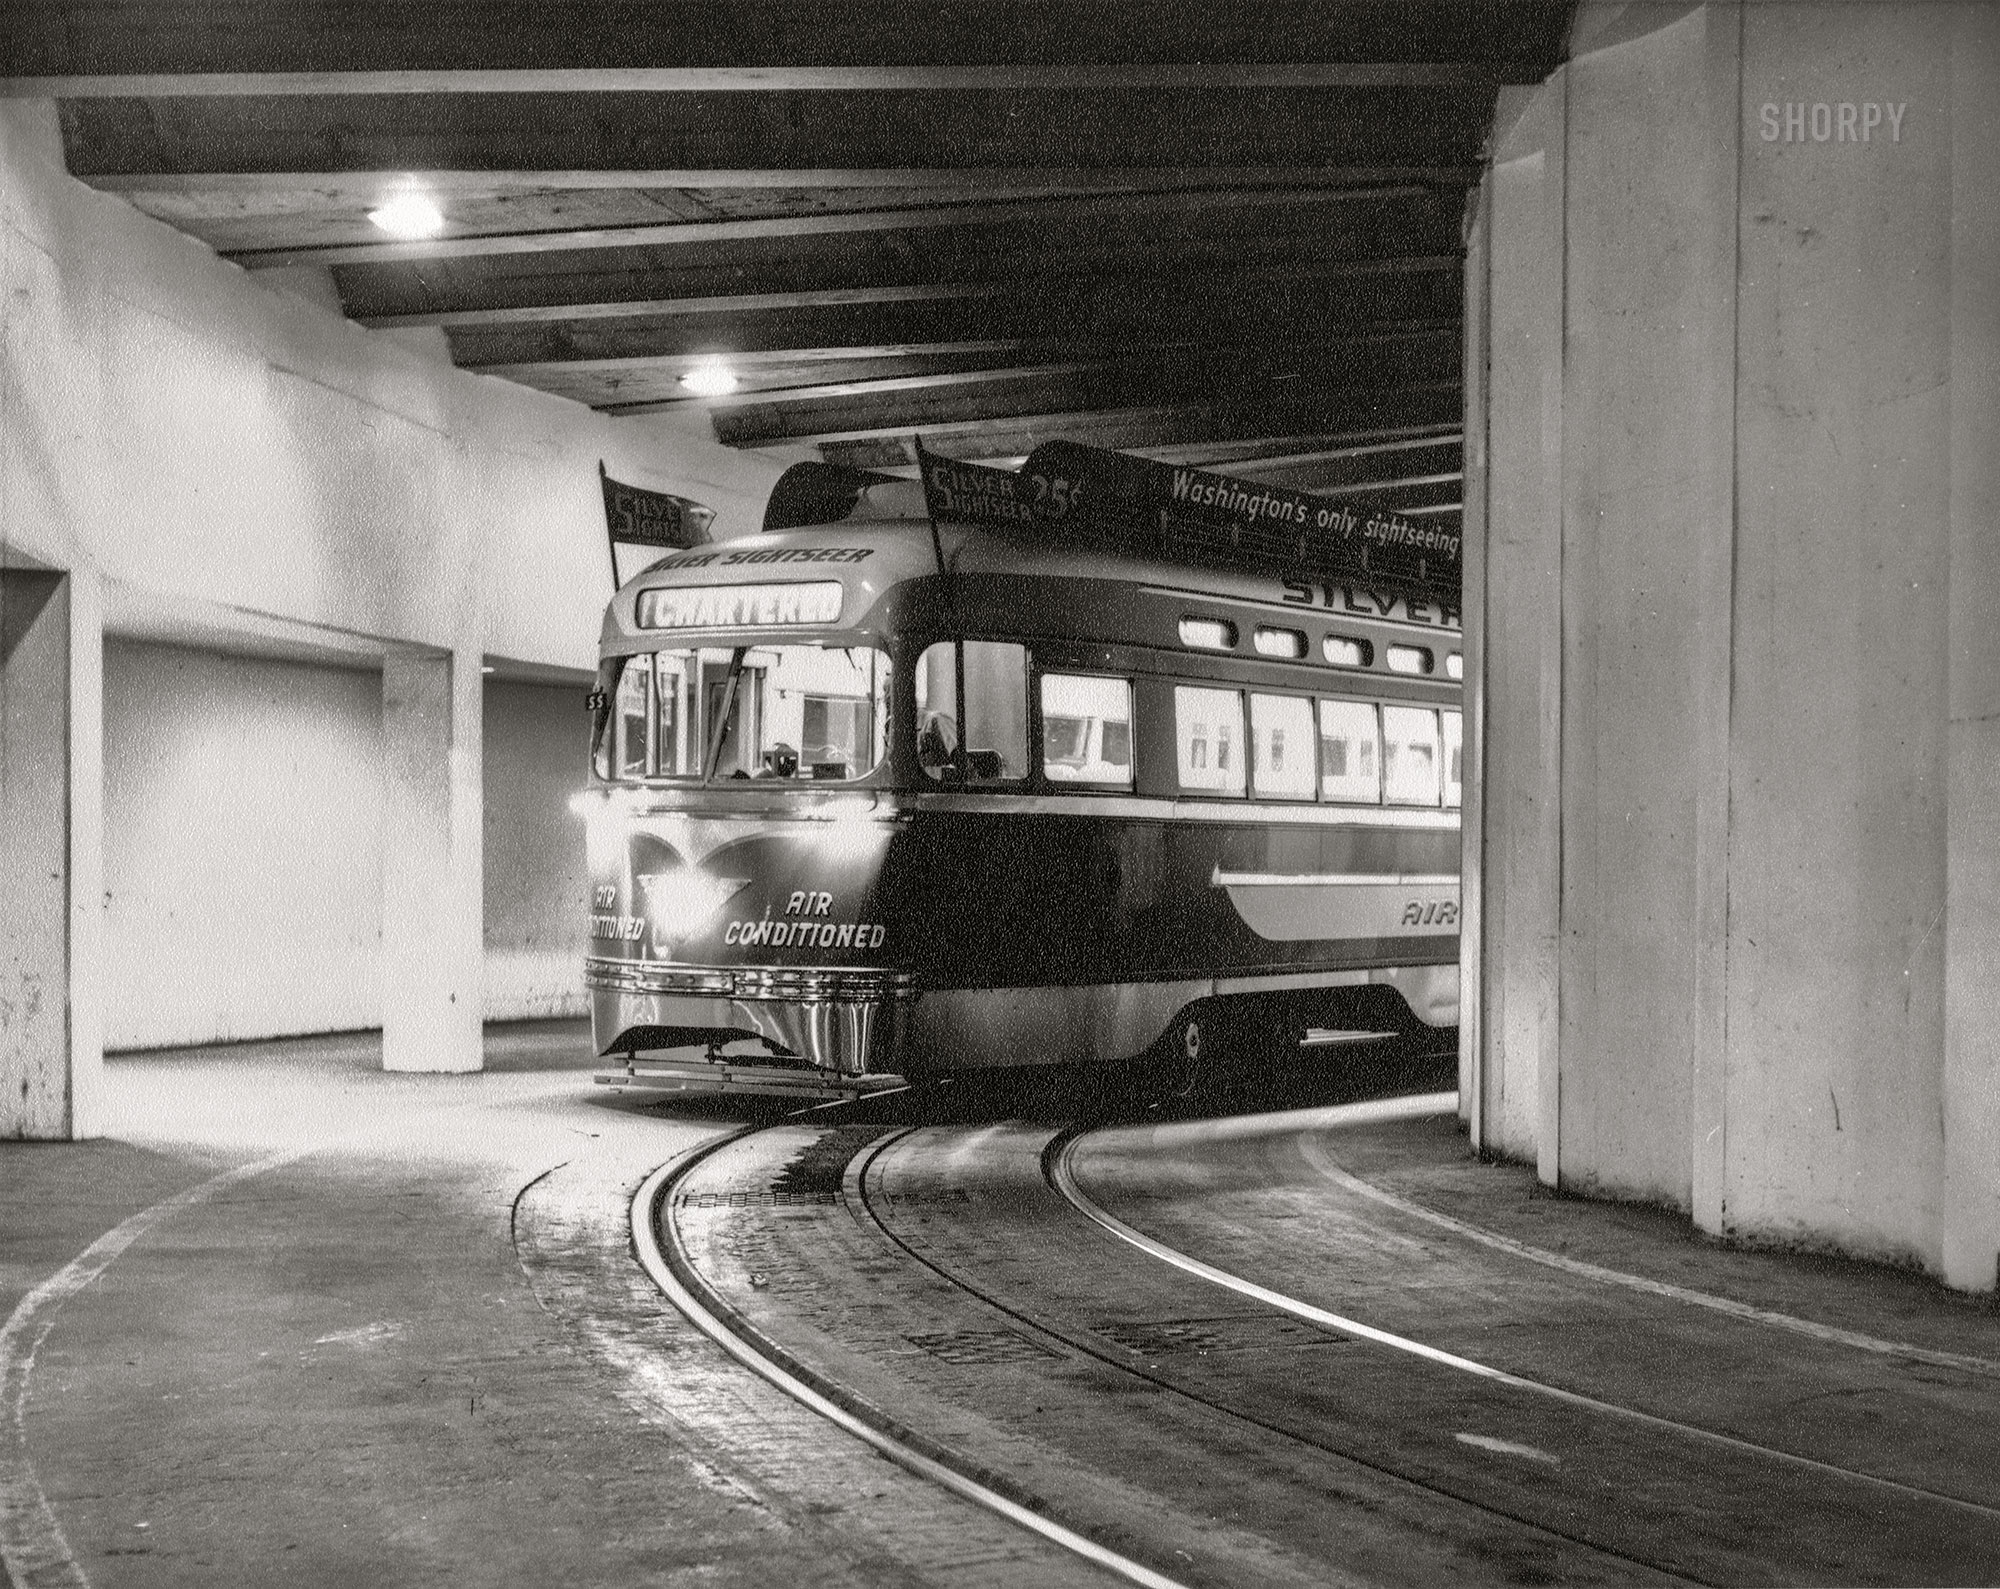 August 22, 1961. Washington, D.C. "Silver Sightseer, D.C. Transit air-conditioned trolley, in tunnel under the U.S. Bureau of Engraving and Printing building." 8x10 inch gelatin silver print by railroad historian Ara Mesrobian (1924-2019). View full size.